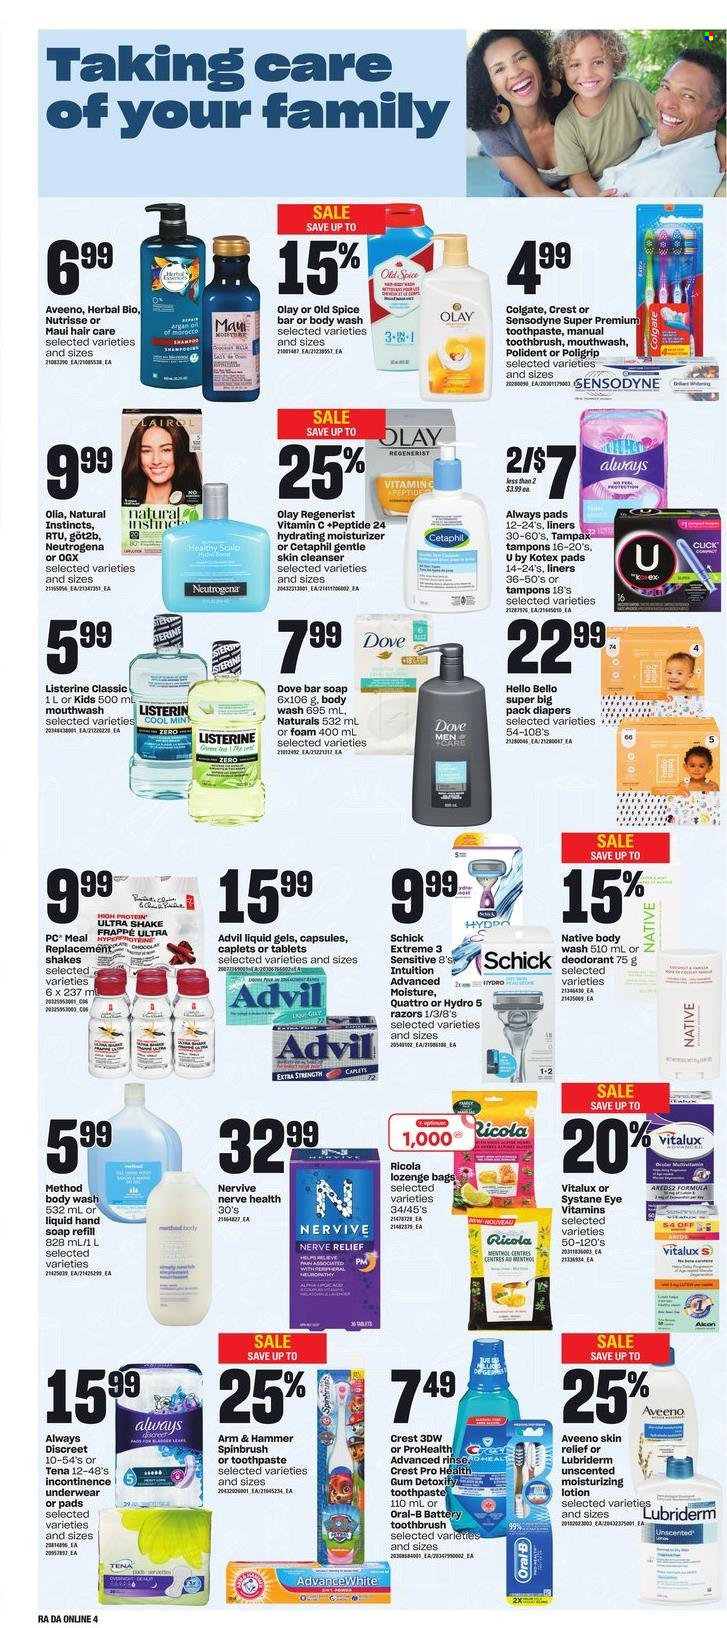 thumbnail - Dominion Flyer - February 02, 2023 - February 08, 2023 - Sales products - shake, Dove, Ricola, ARM & HAMMER, spice, nappies, Aveeno, body wash, hand soap, soap bar, soap, toothbrush, toothpaste, mouthwash, Polident, Crest, Always pads, sanitary pads, Always Discreet, Kotex, Kotex pads, tampons, cleanser, moisturizer, Olay, OGX, Clairol, Maui Moisture, body lotion, Lubriderm, anti-perspirant, Schick, bag, server, vitamin c, argan oil, Advil Rapid, Colgate, Listerine, Neutrogena, Systane, Tampax, Old Spice, Oral-B, Sensodyne, deodorant. Page 10.